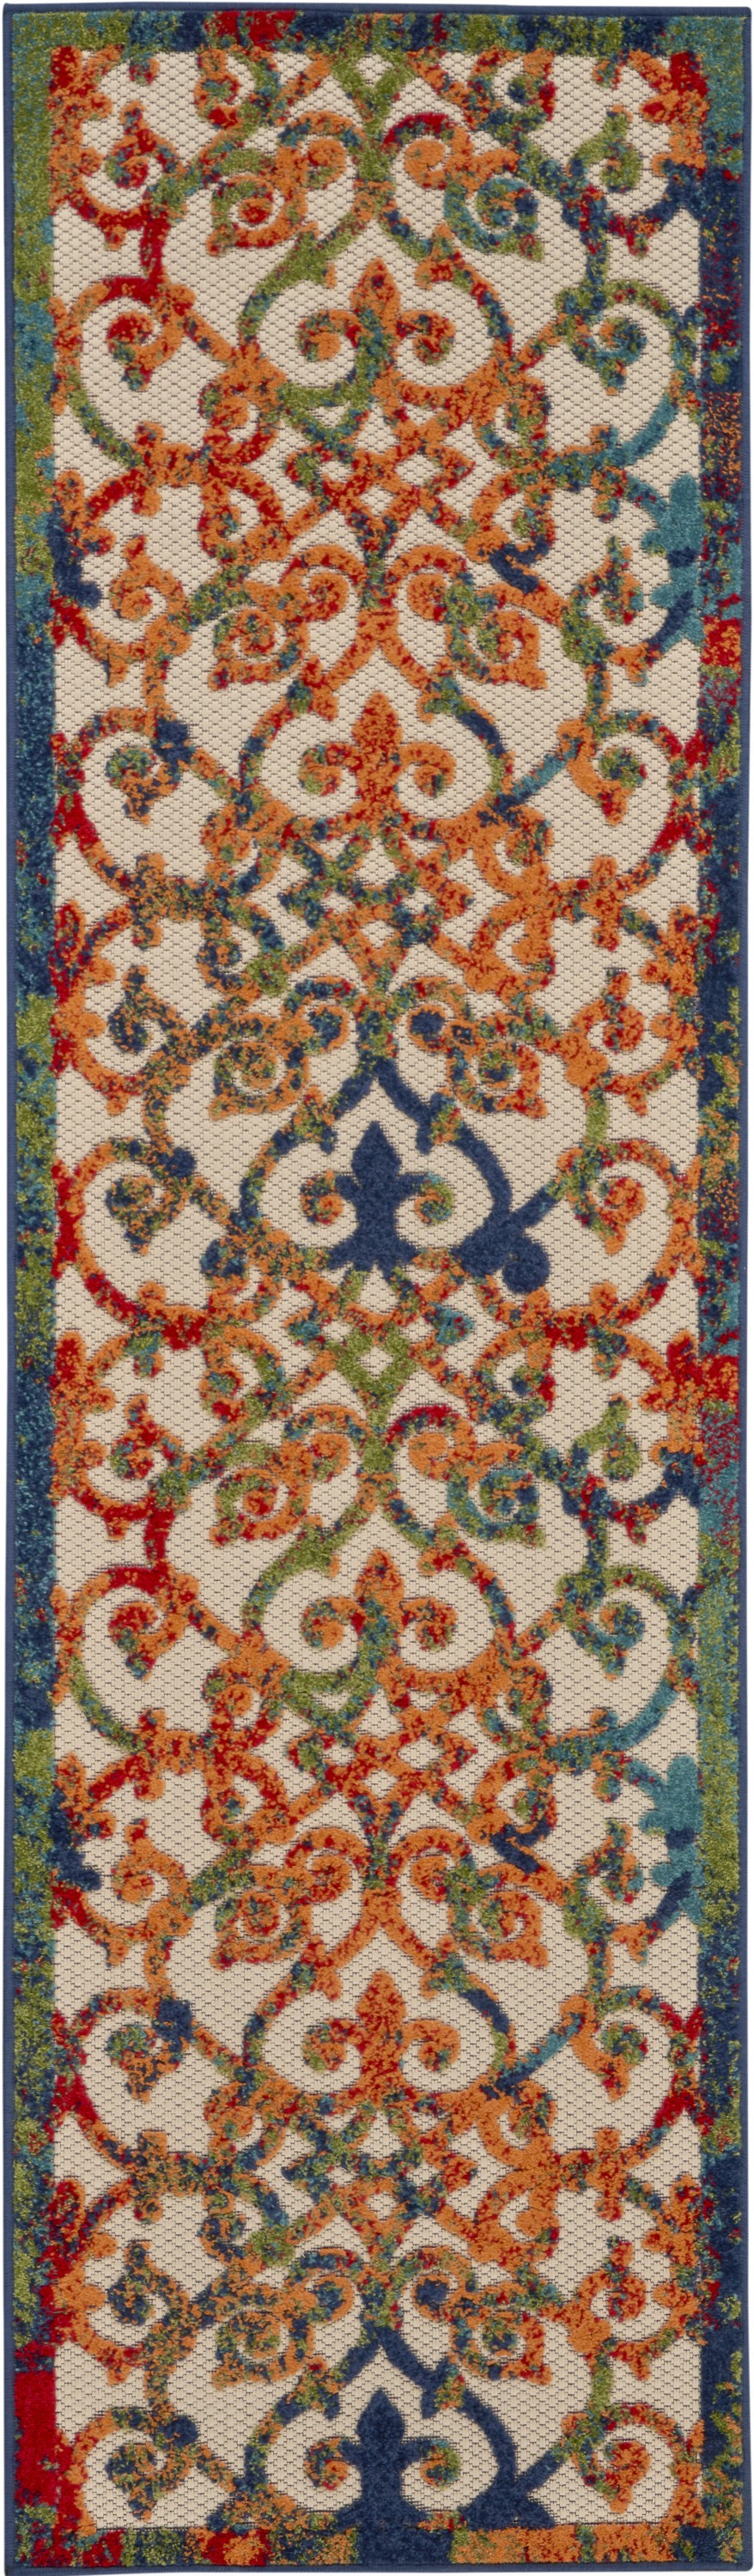 2' X 6' Ivory And Blue Floral Indoor Outdoor Area Rug-385024-1